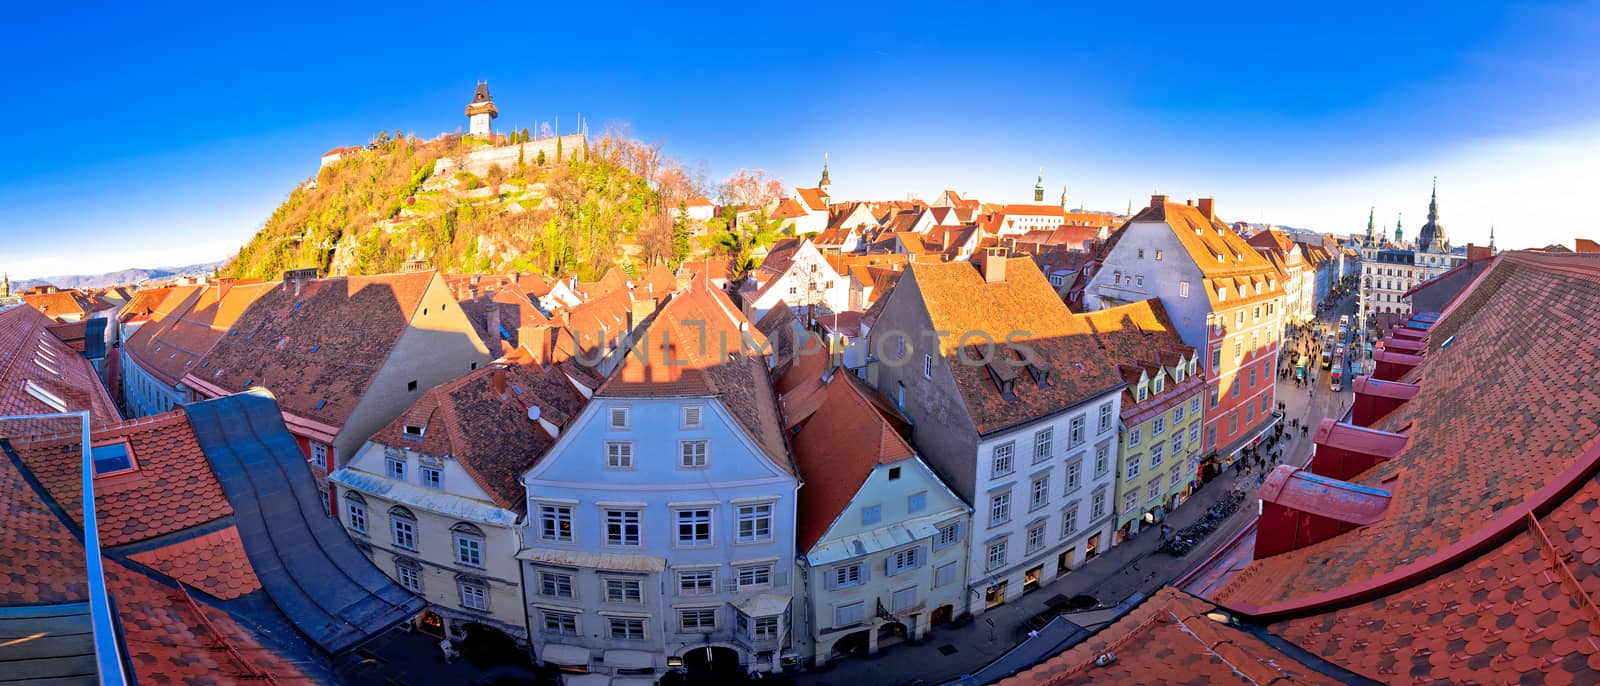 Graz cityscape and Schlossberg panoramic view, Styria region of Austria